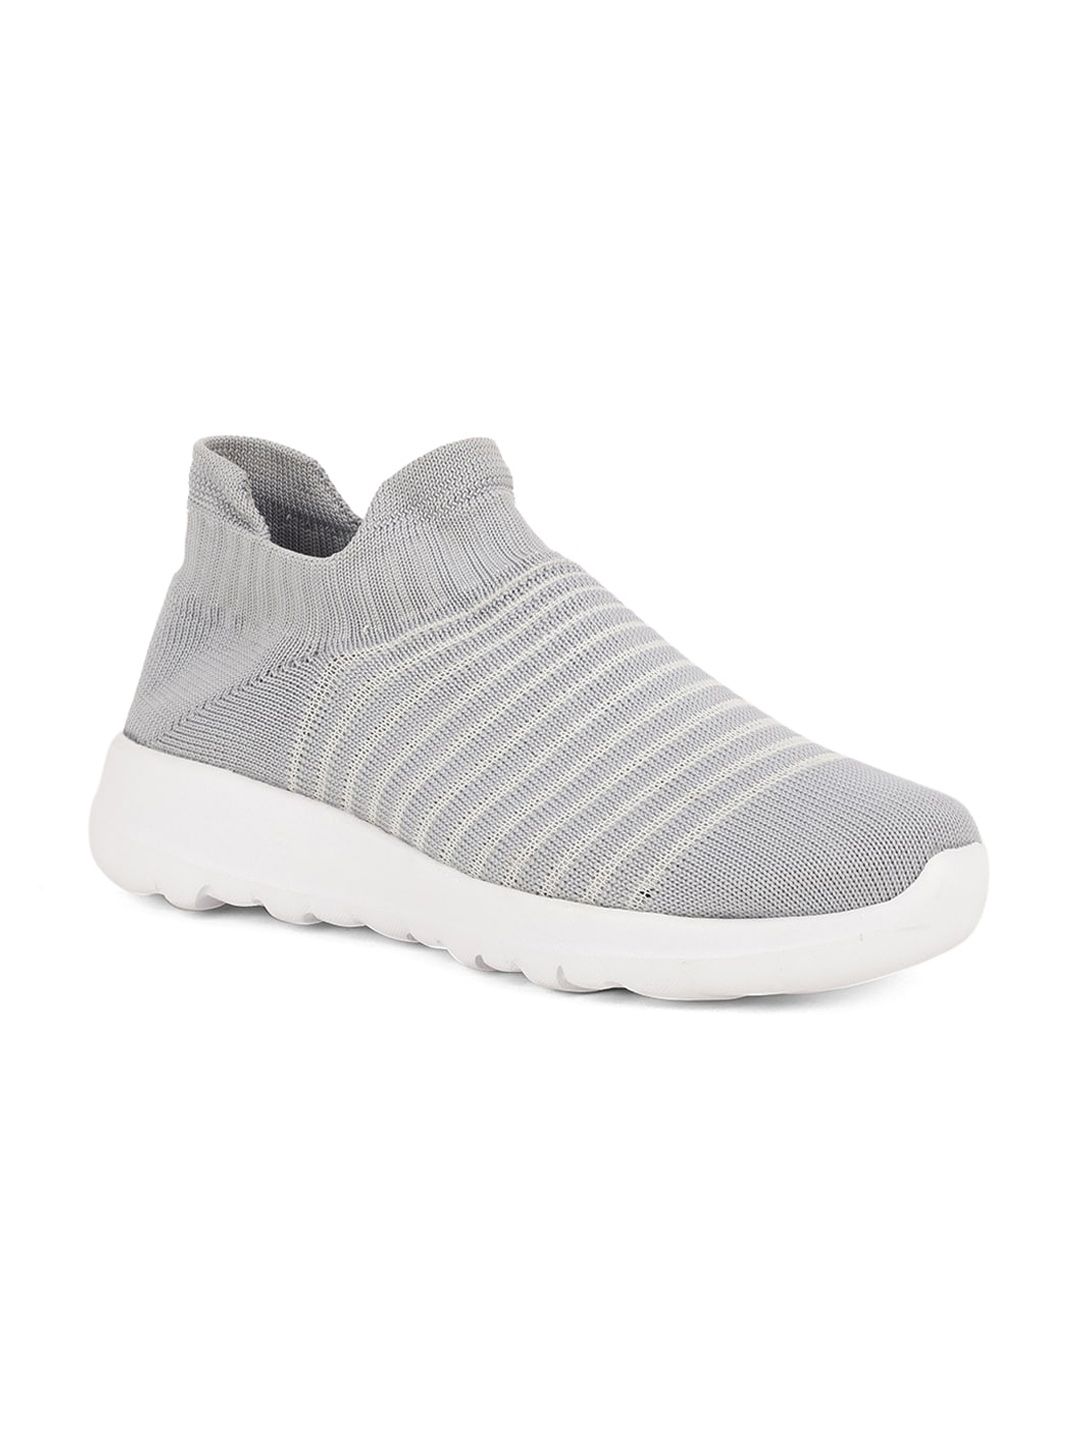 HERE&NOW Women Grey Striped Slip-On Sneakers Price in India